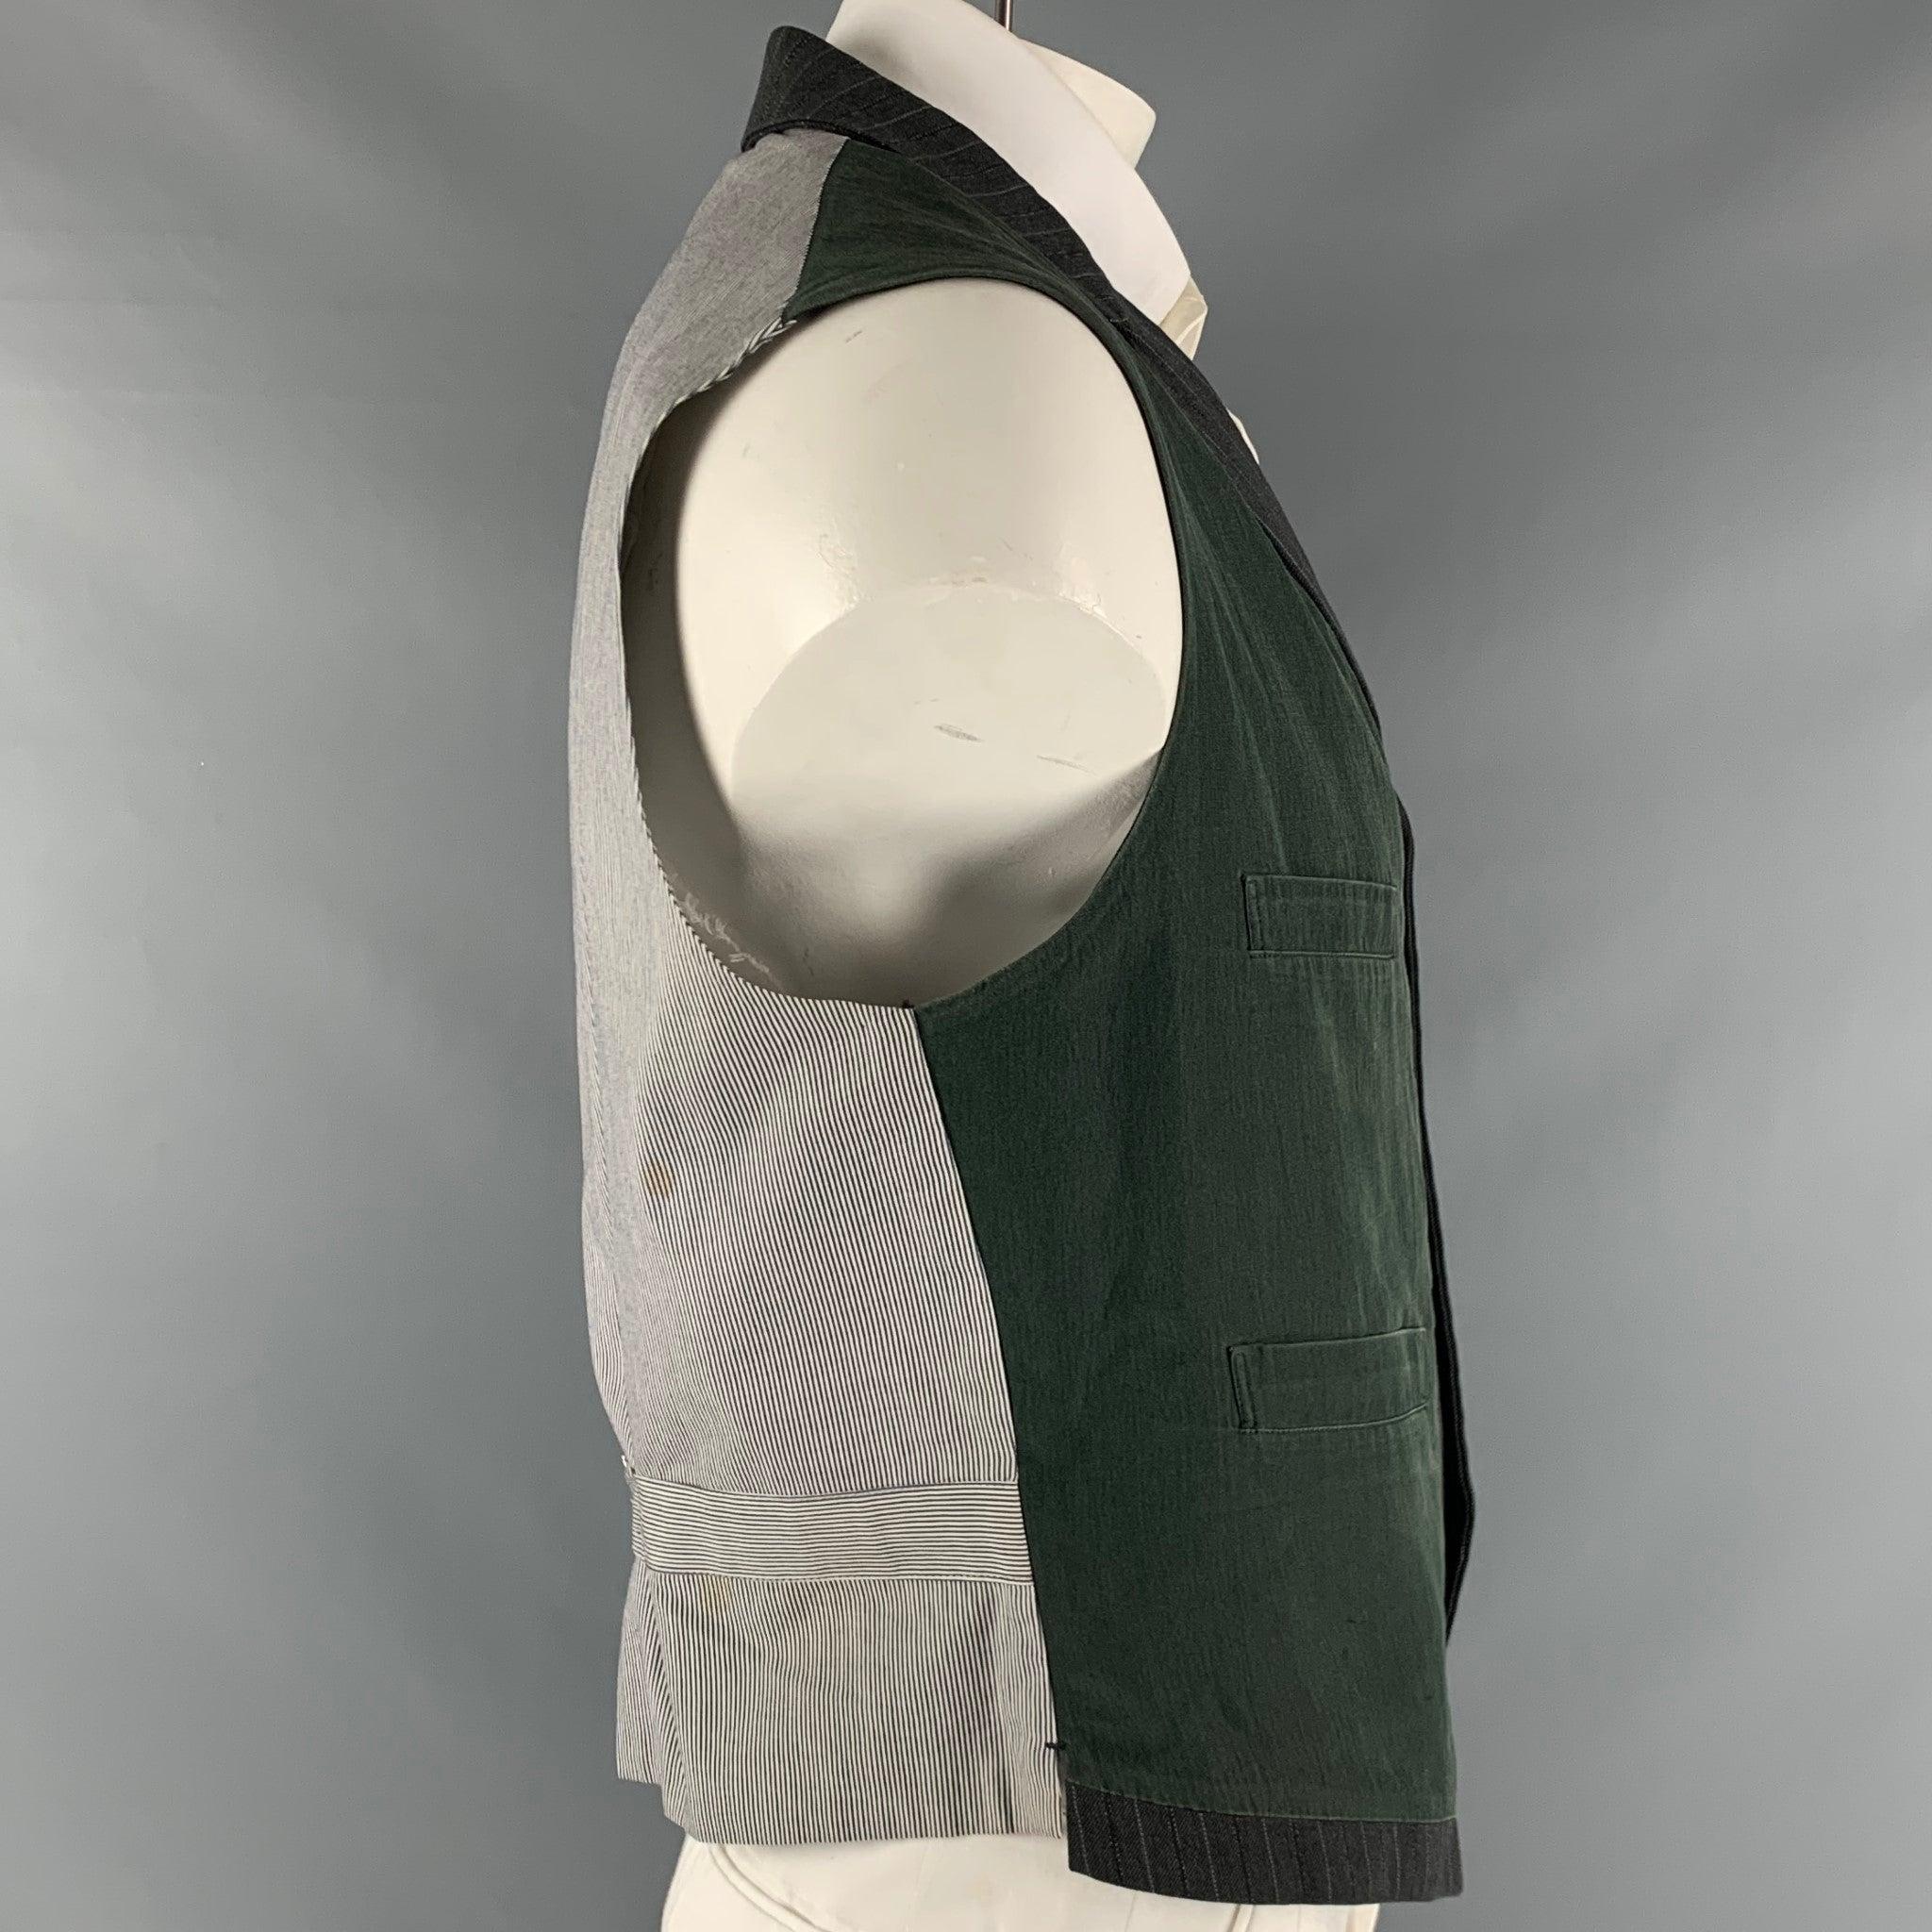 YOHJI YAMAMOTO Circa'91 vest comes in a grey and dark green silk blend woven material featuring a mixed textures, notch lapel, welt pockets, and a buttoned closure. Made in Japan.Good Pre-Owned Condition. Moderate marks at back and inside collar. As